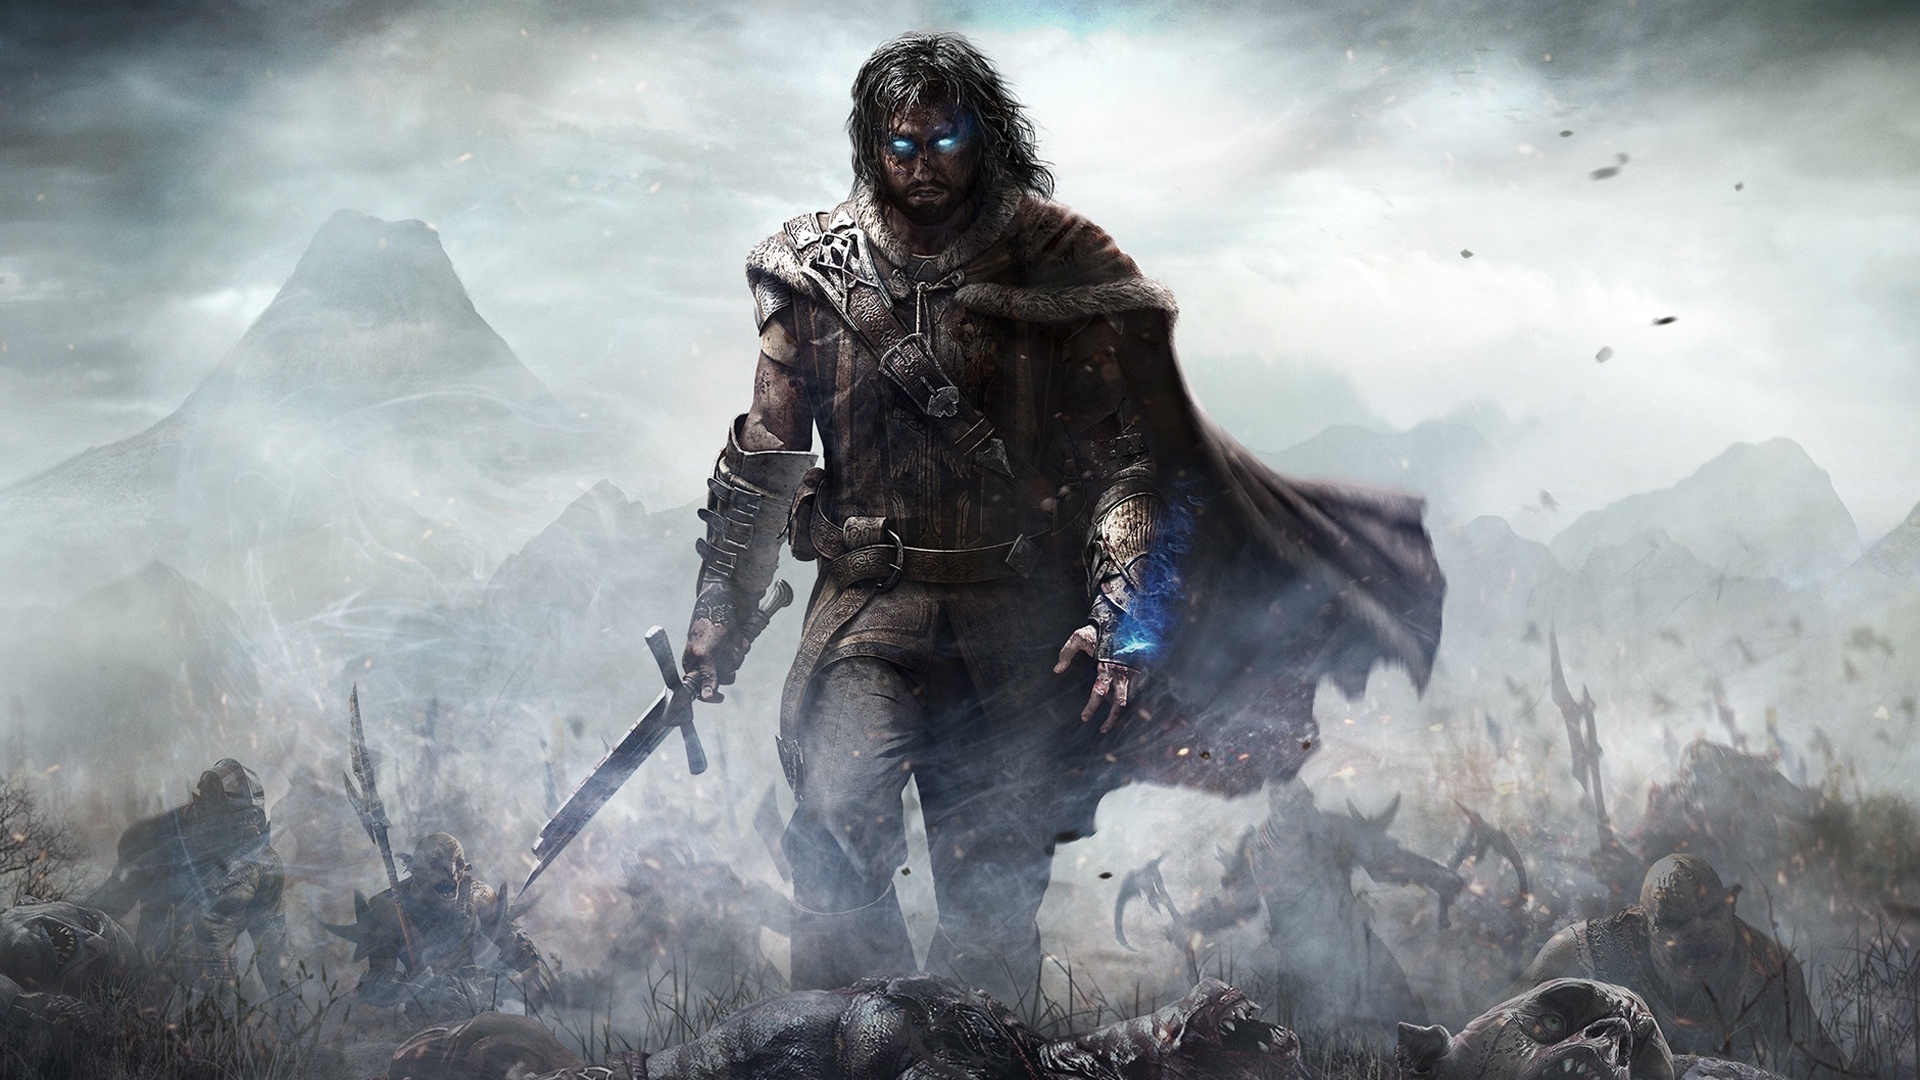 shadow of mordor images